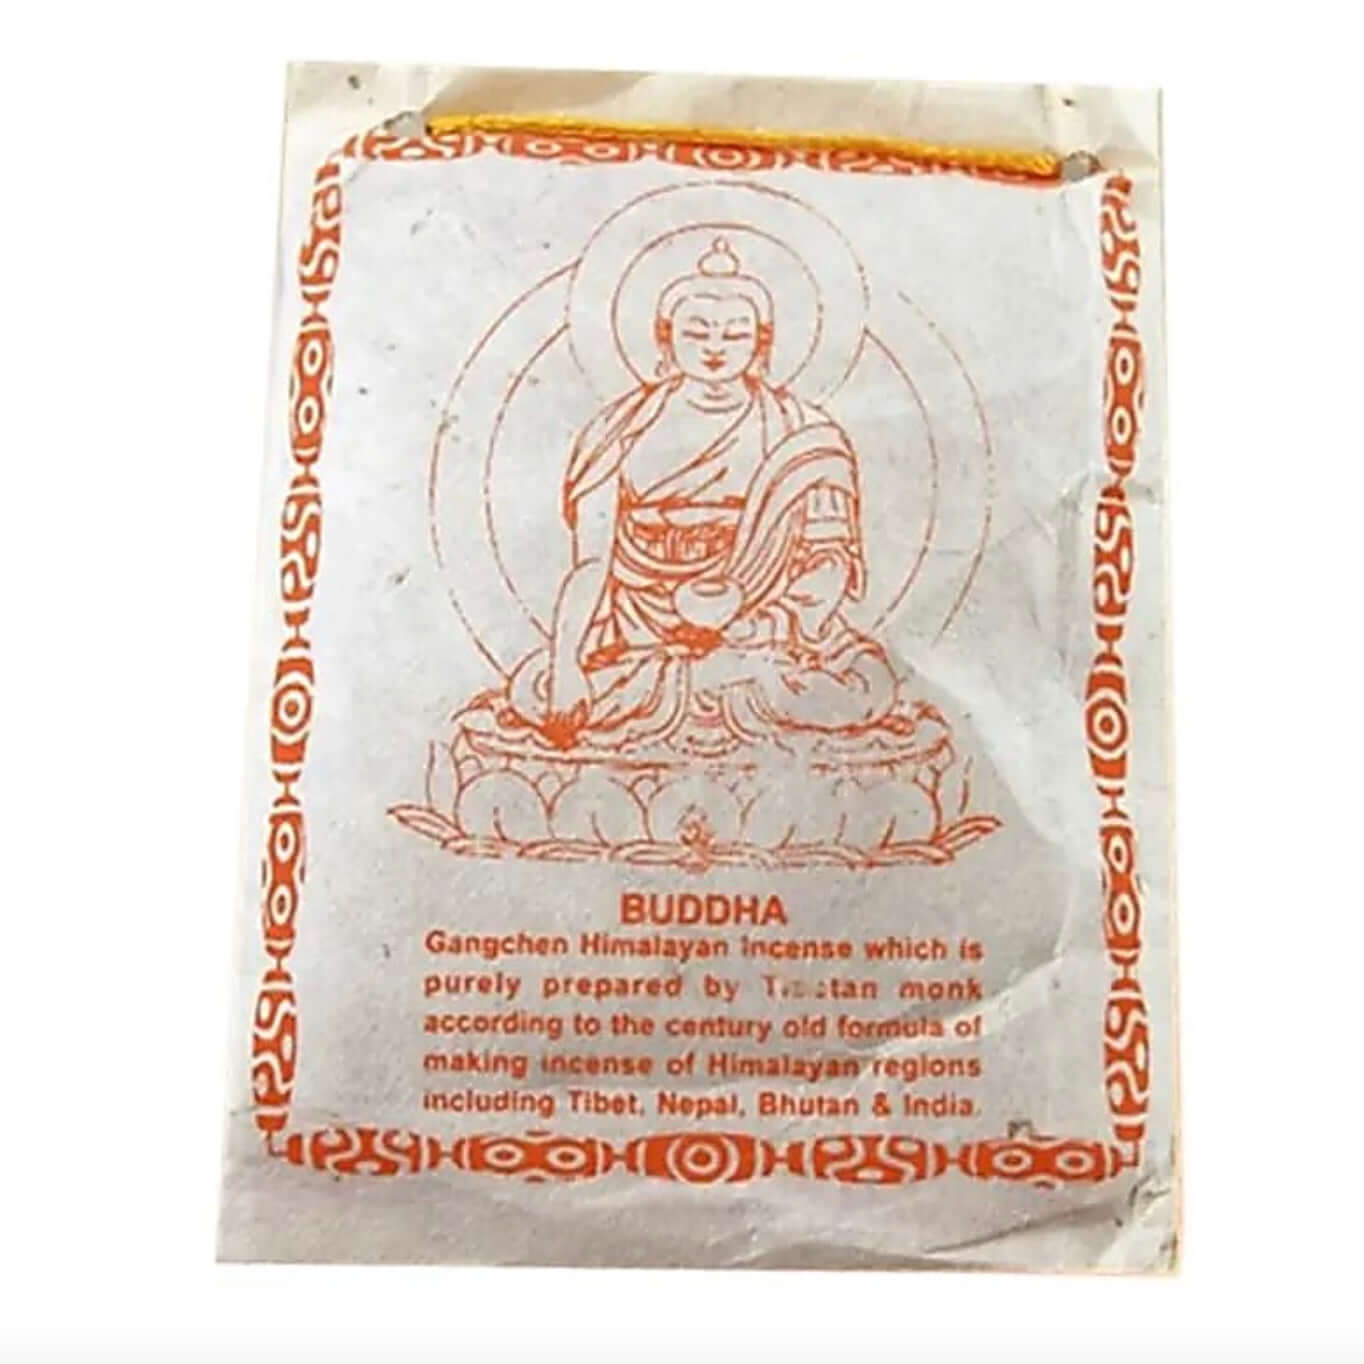 Tibetan incense powder Buddha - purity and tradition from the Himalayas